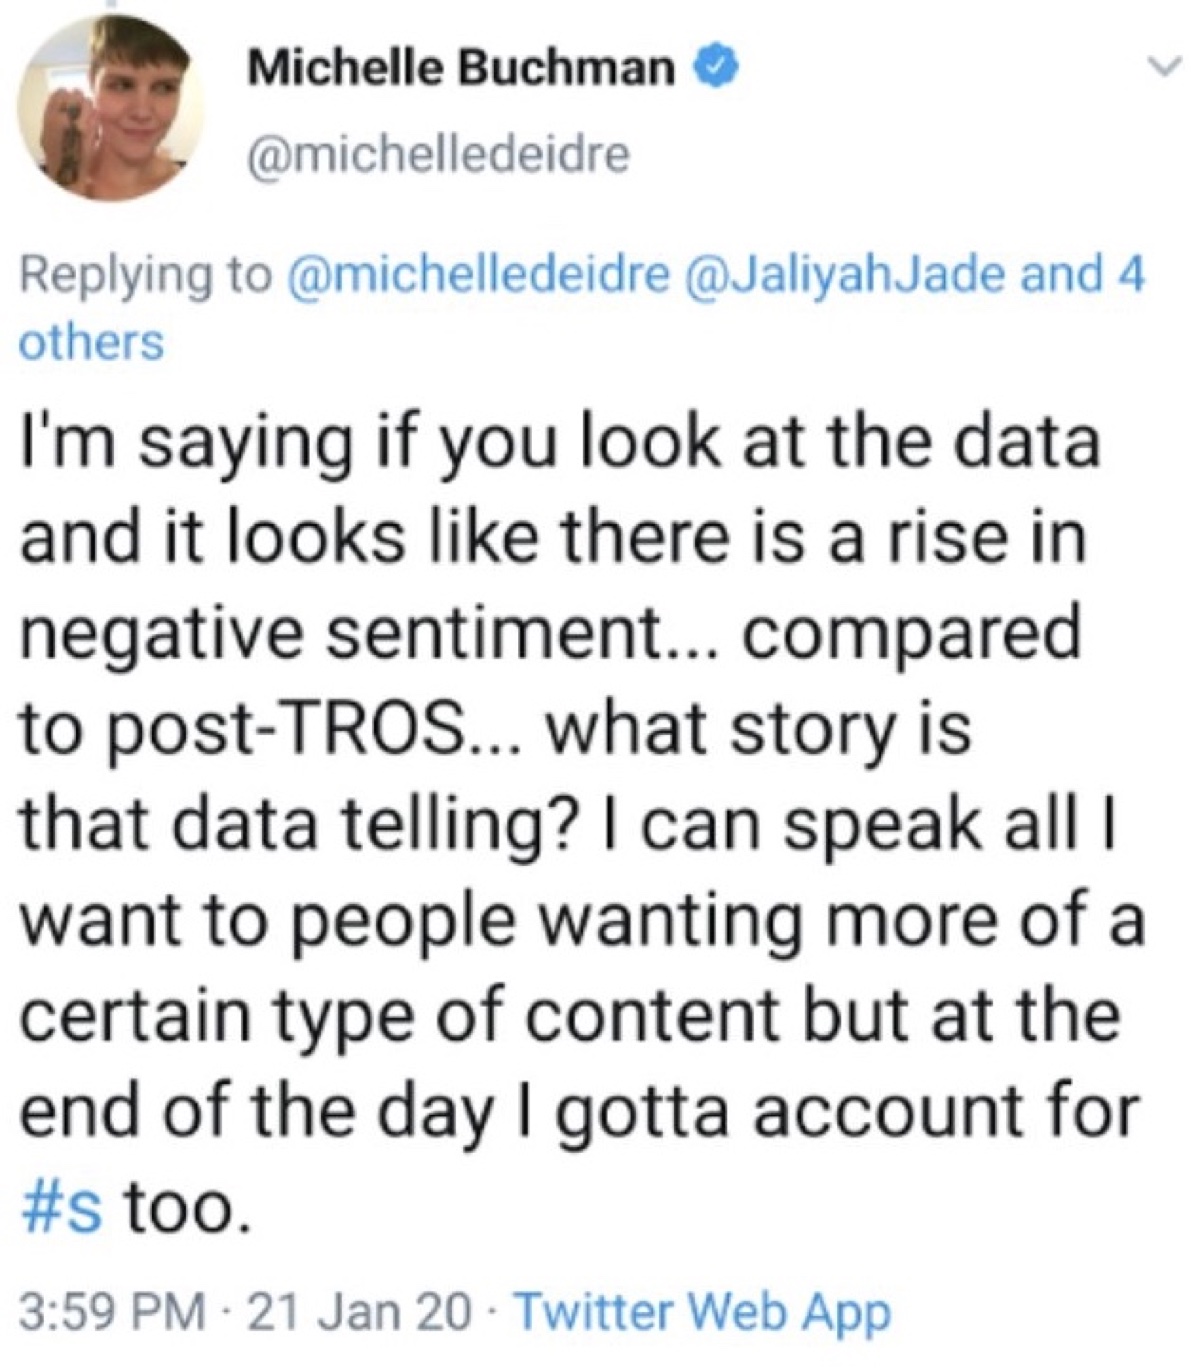 Buchman reiterated that the data shows a rise in engative sentiment when posting this type of content (Twitter - @saltandrockets)